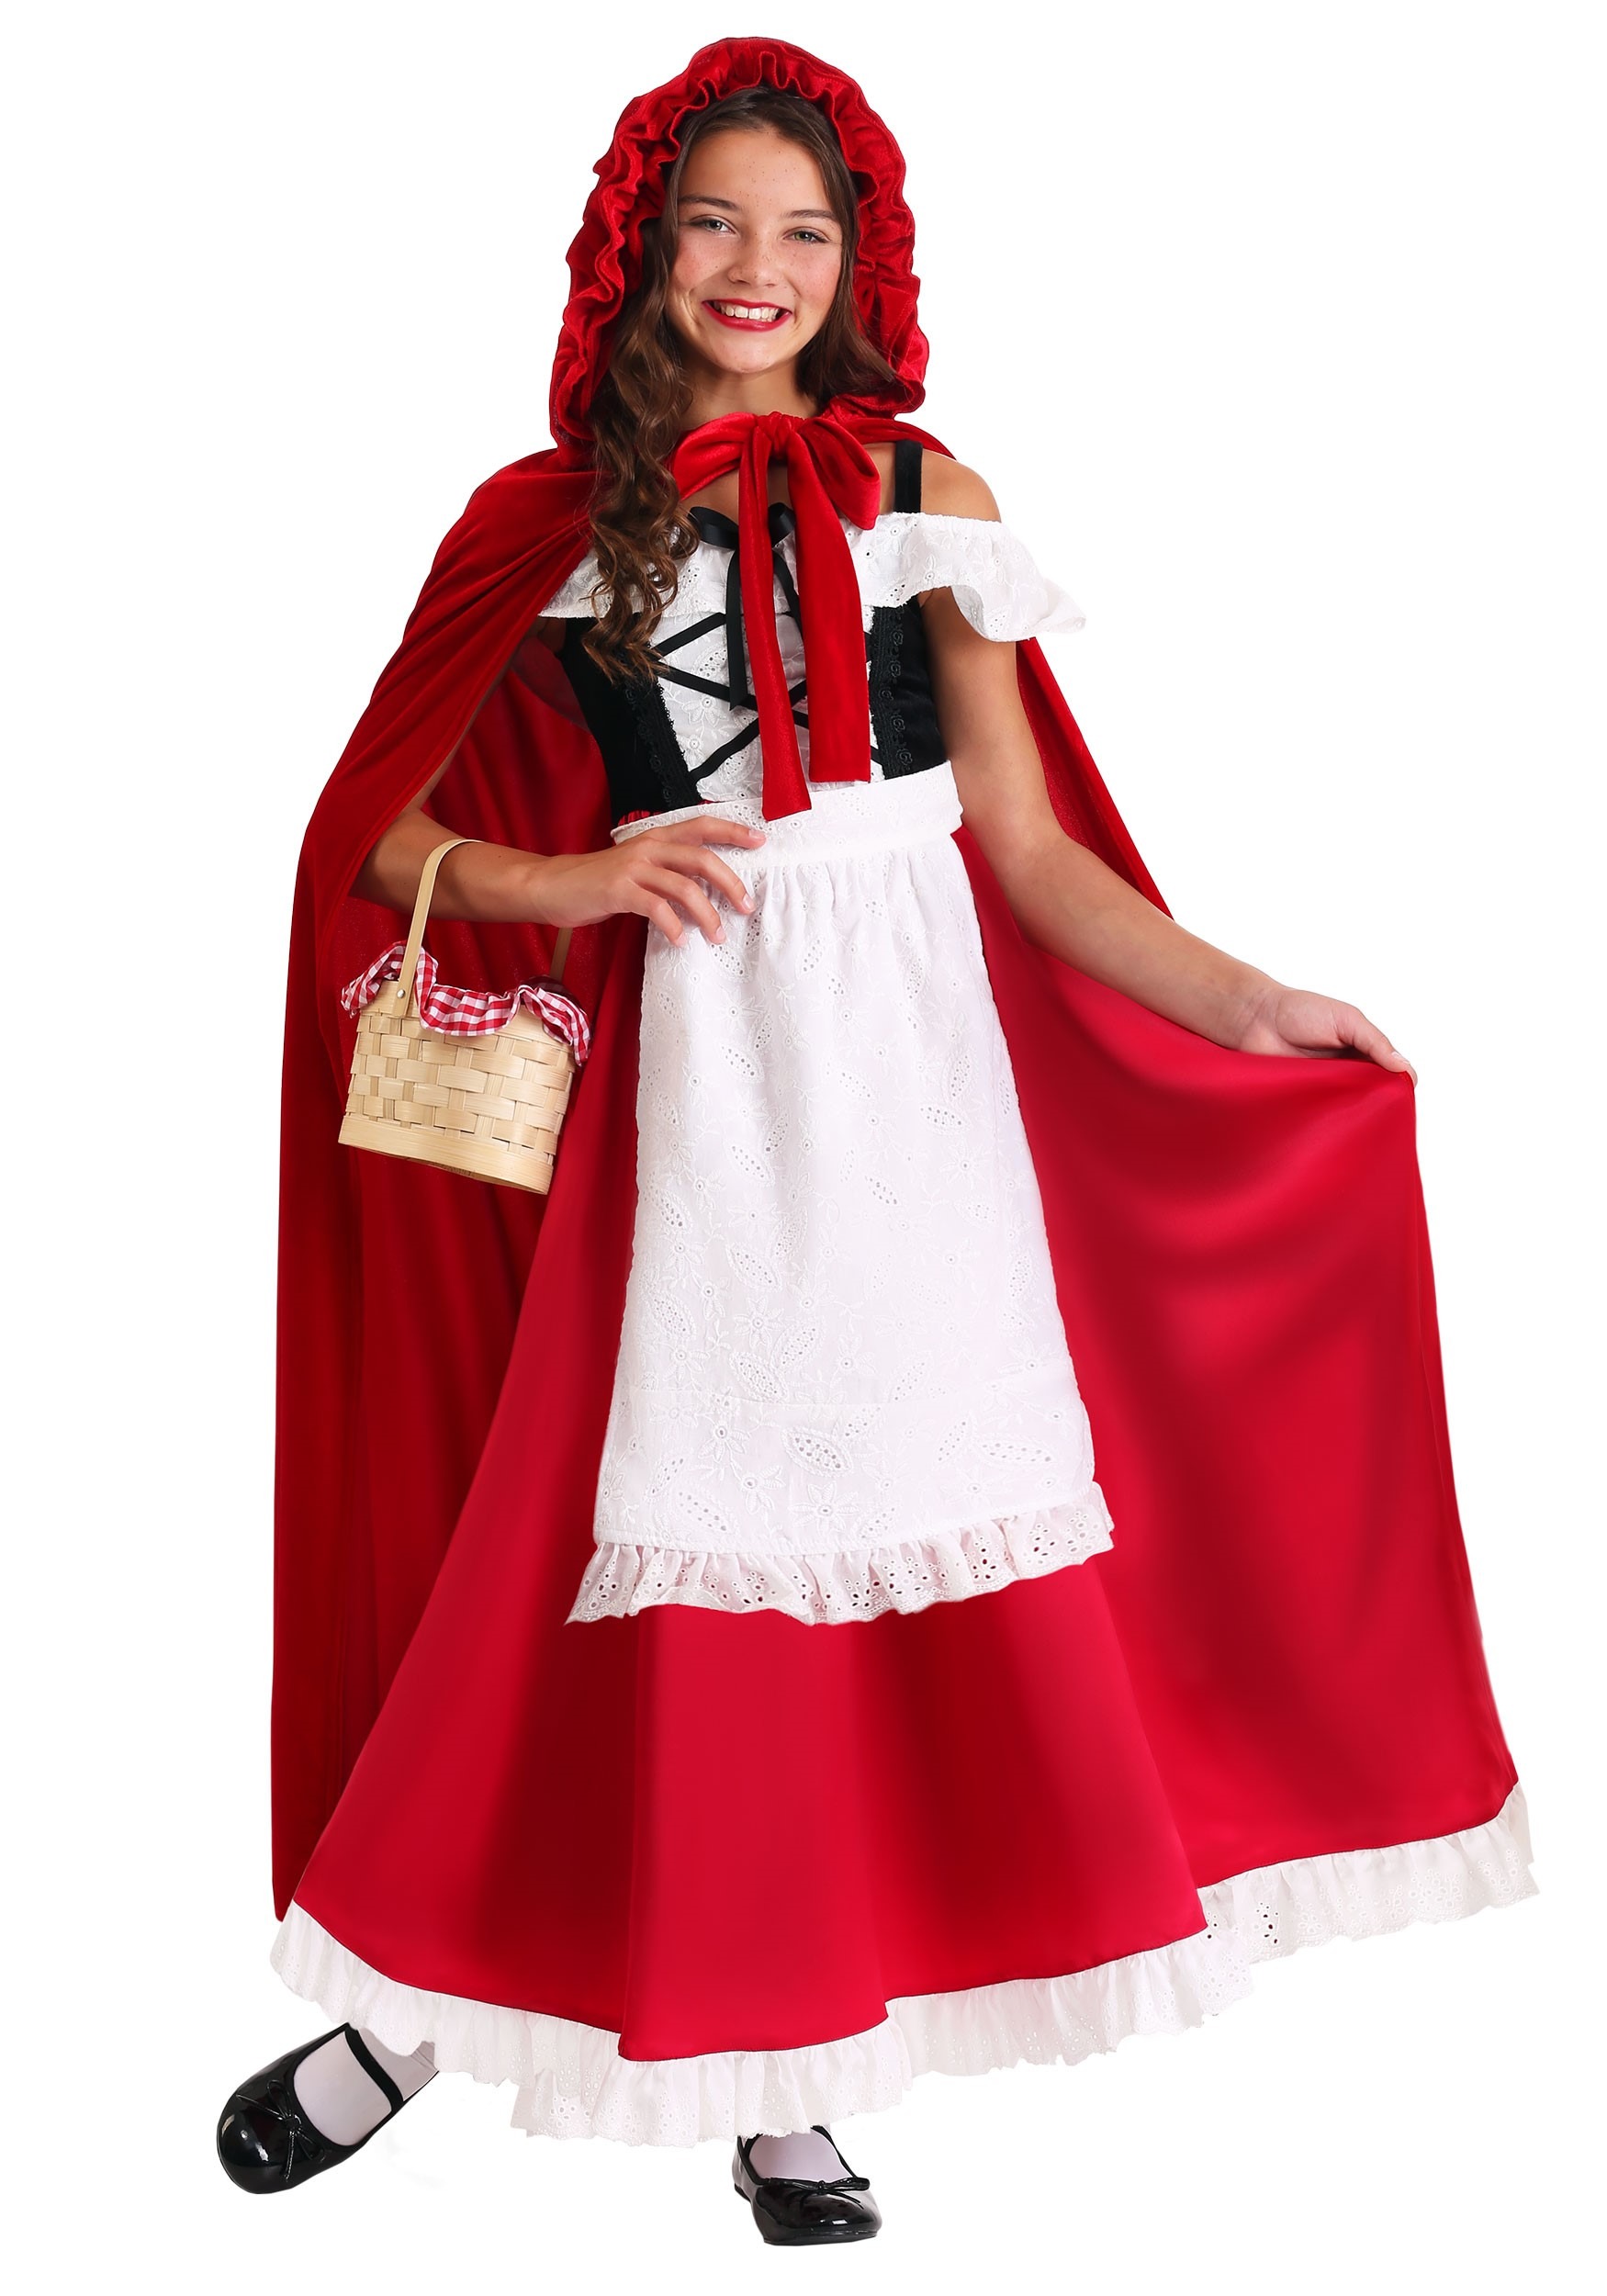 Deluxe Red Riding Hood Child’s Costume